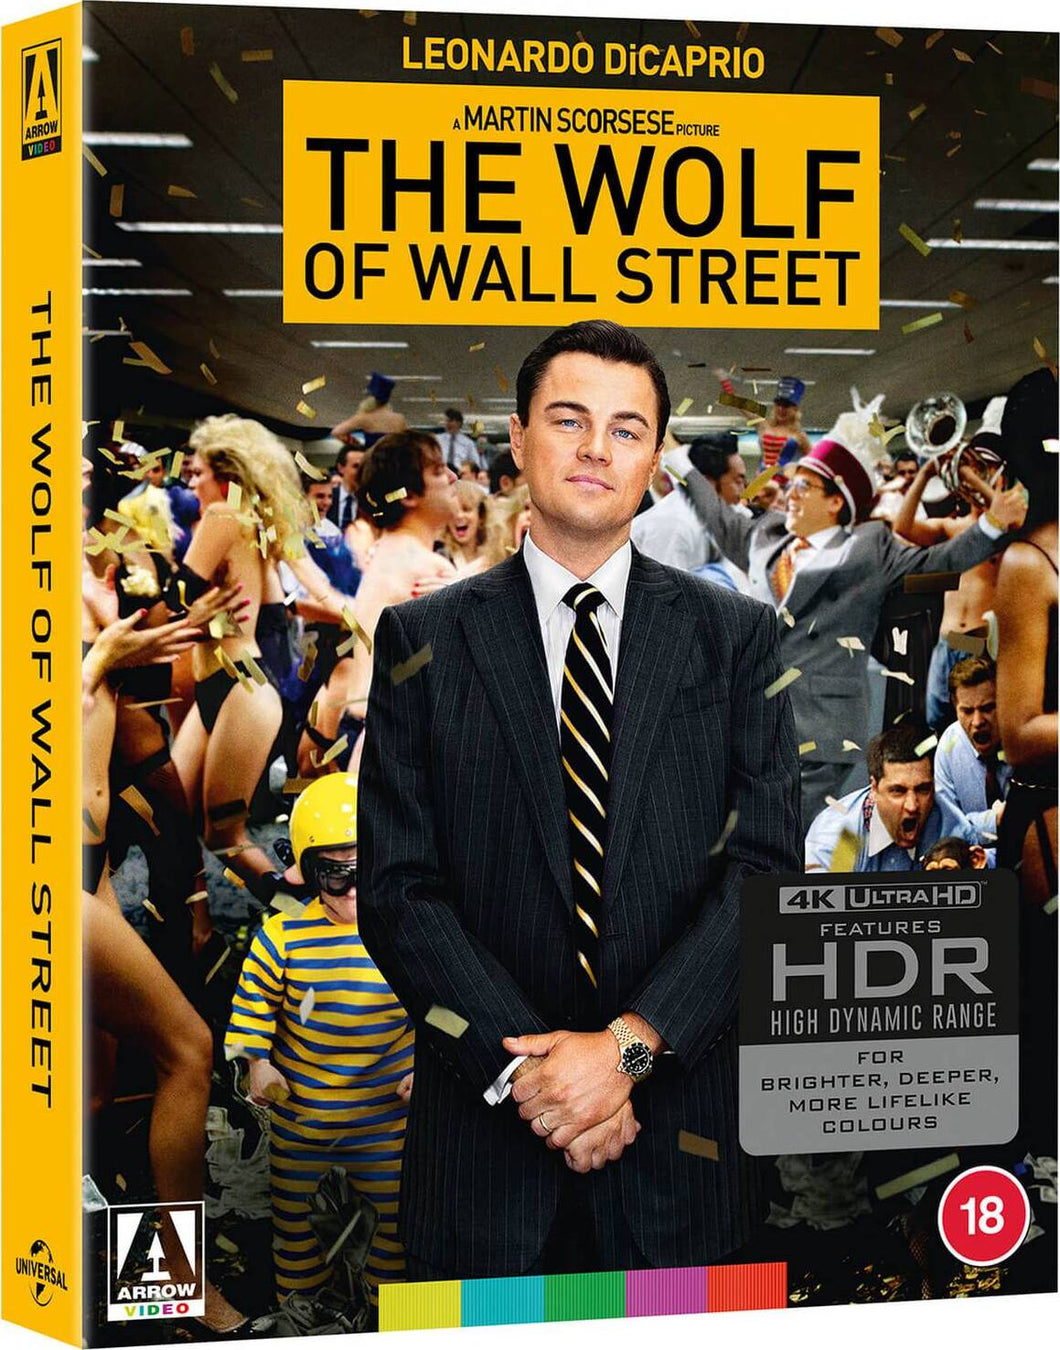 The Wolf of Wall Street 4K (1983) de Martin Scorsese - front cover